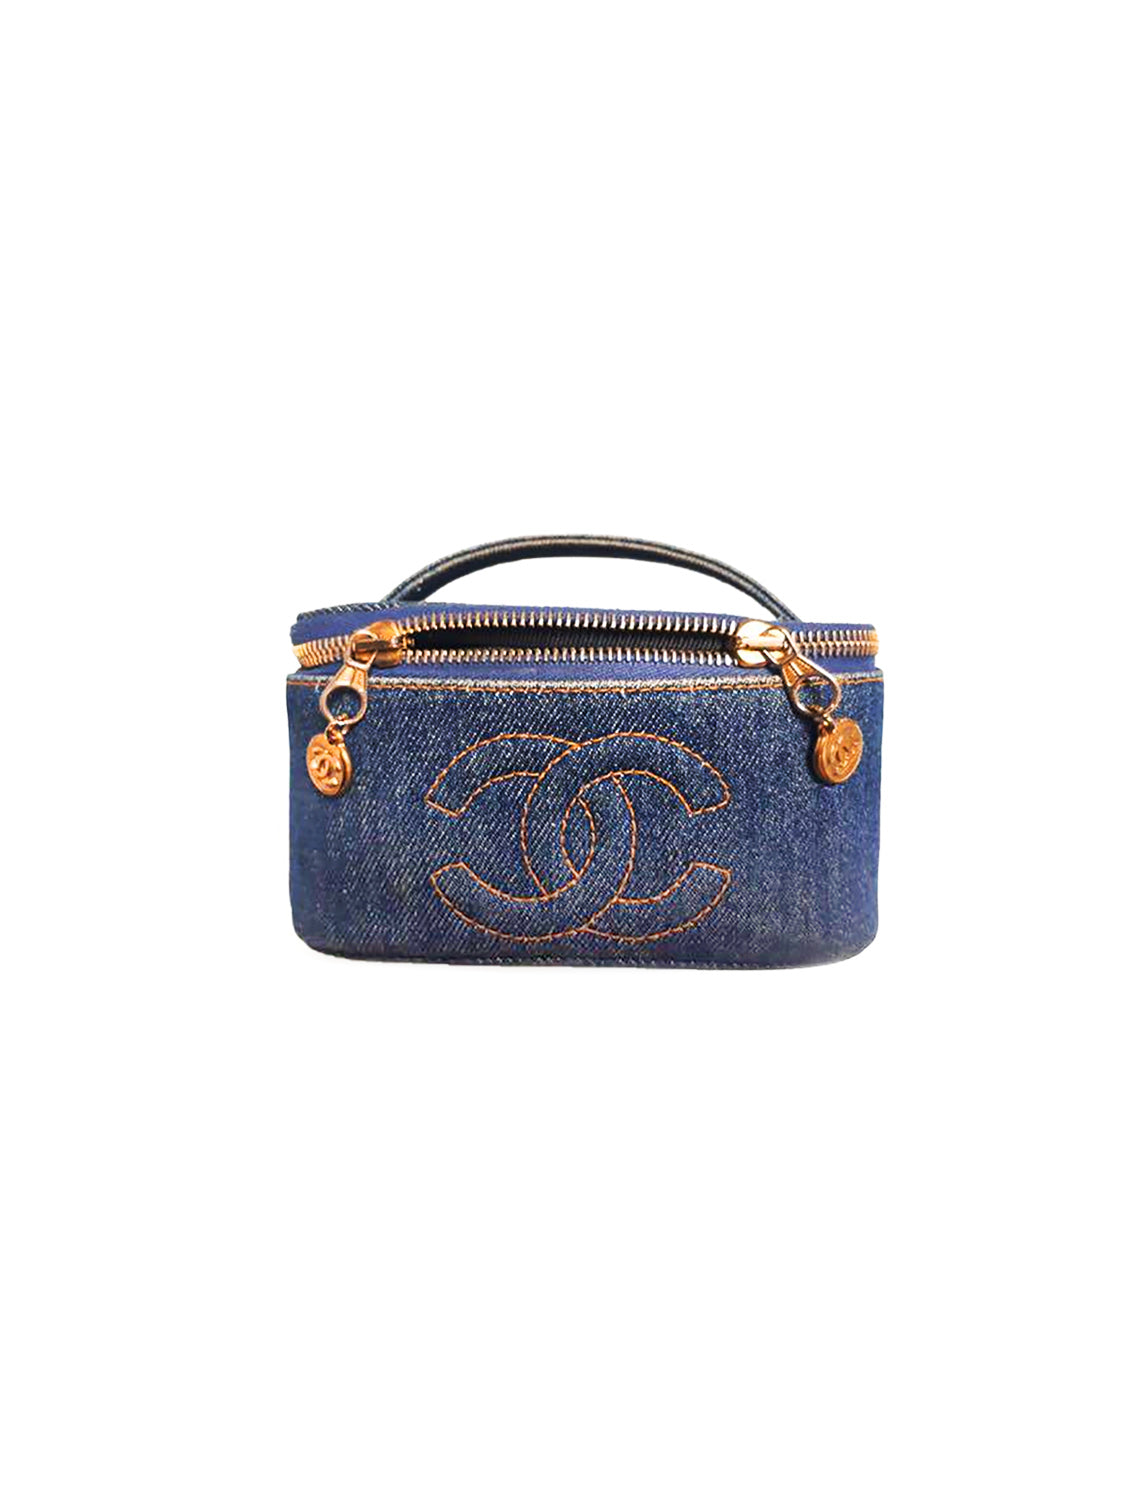 Chanel Printed Light Blue Denim Quilted Vanity Oval Clutch With